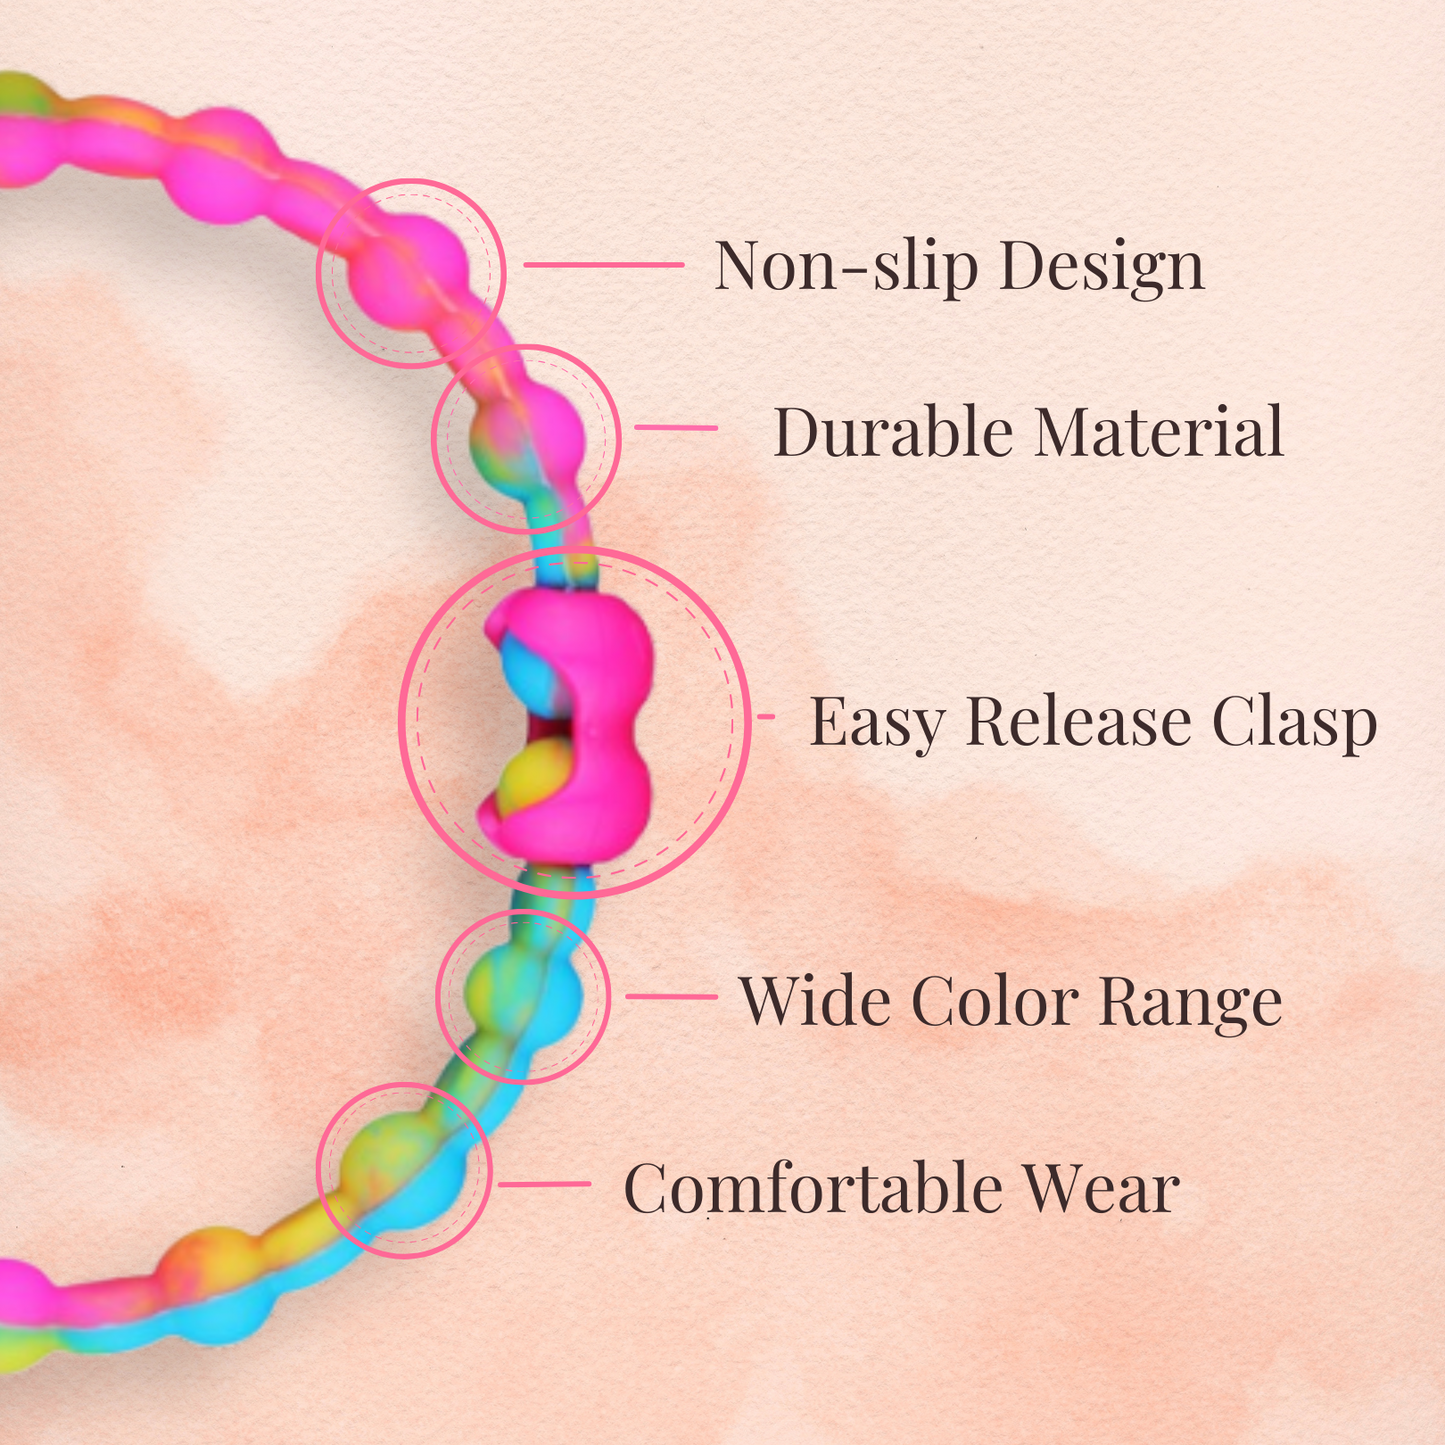 Lunar Glow Pack PRO Hair Ties (4-Pack): Illuminate Your Style with Celestial Hues